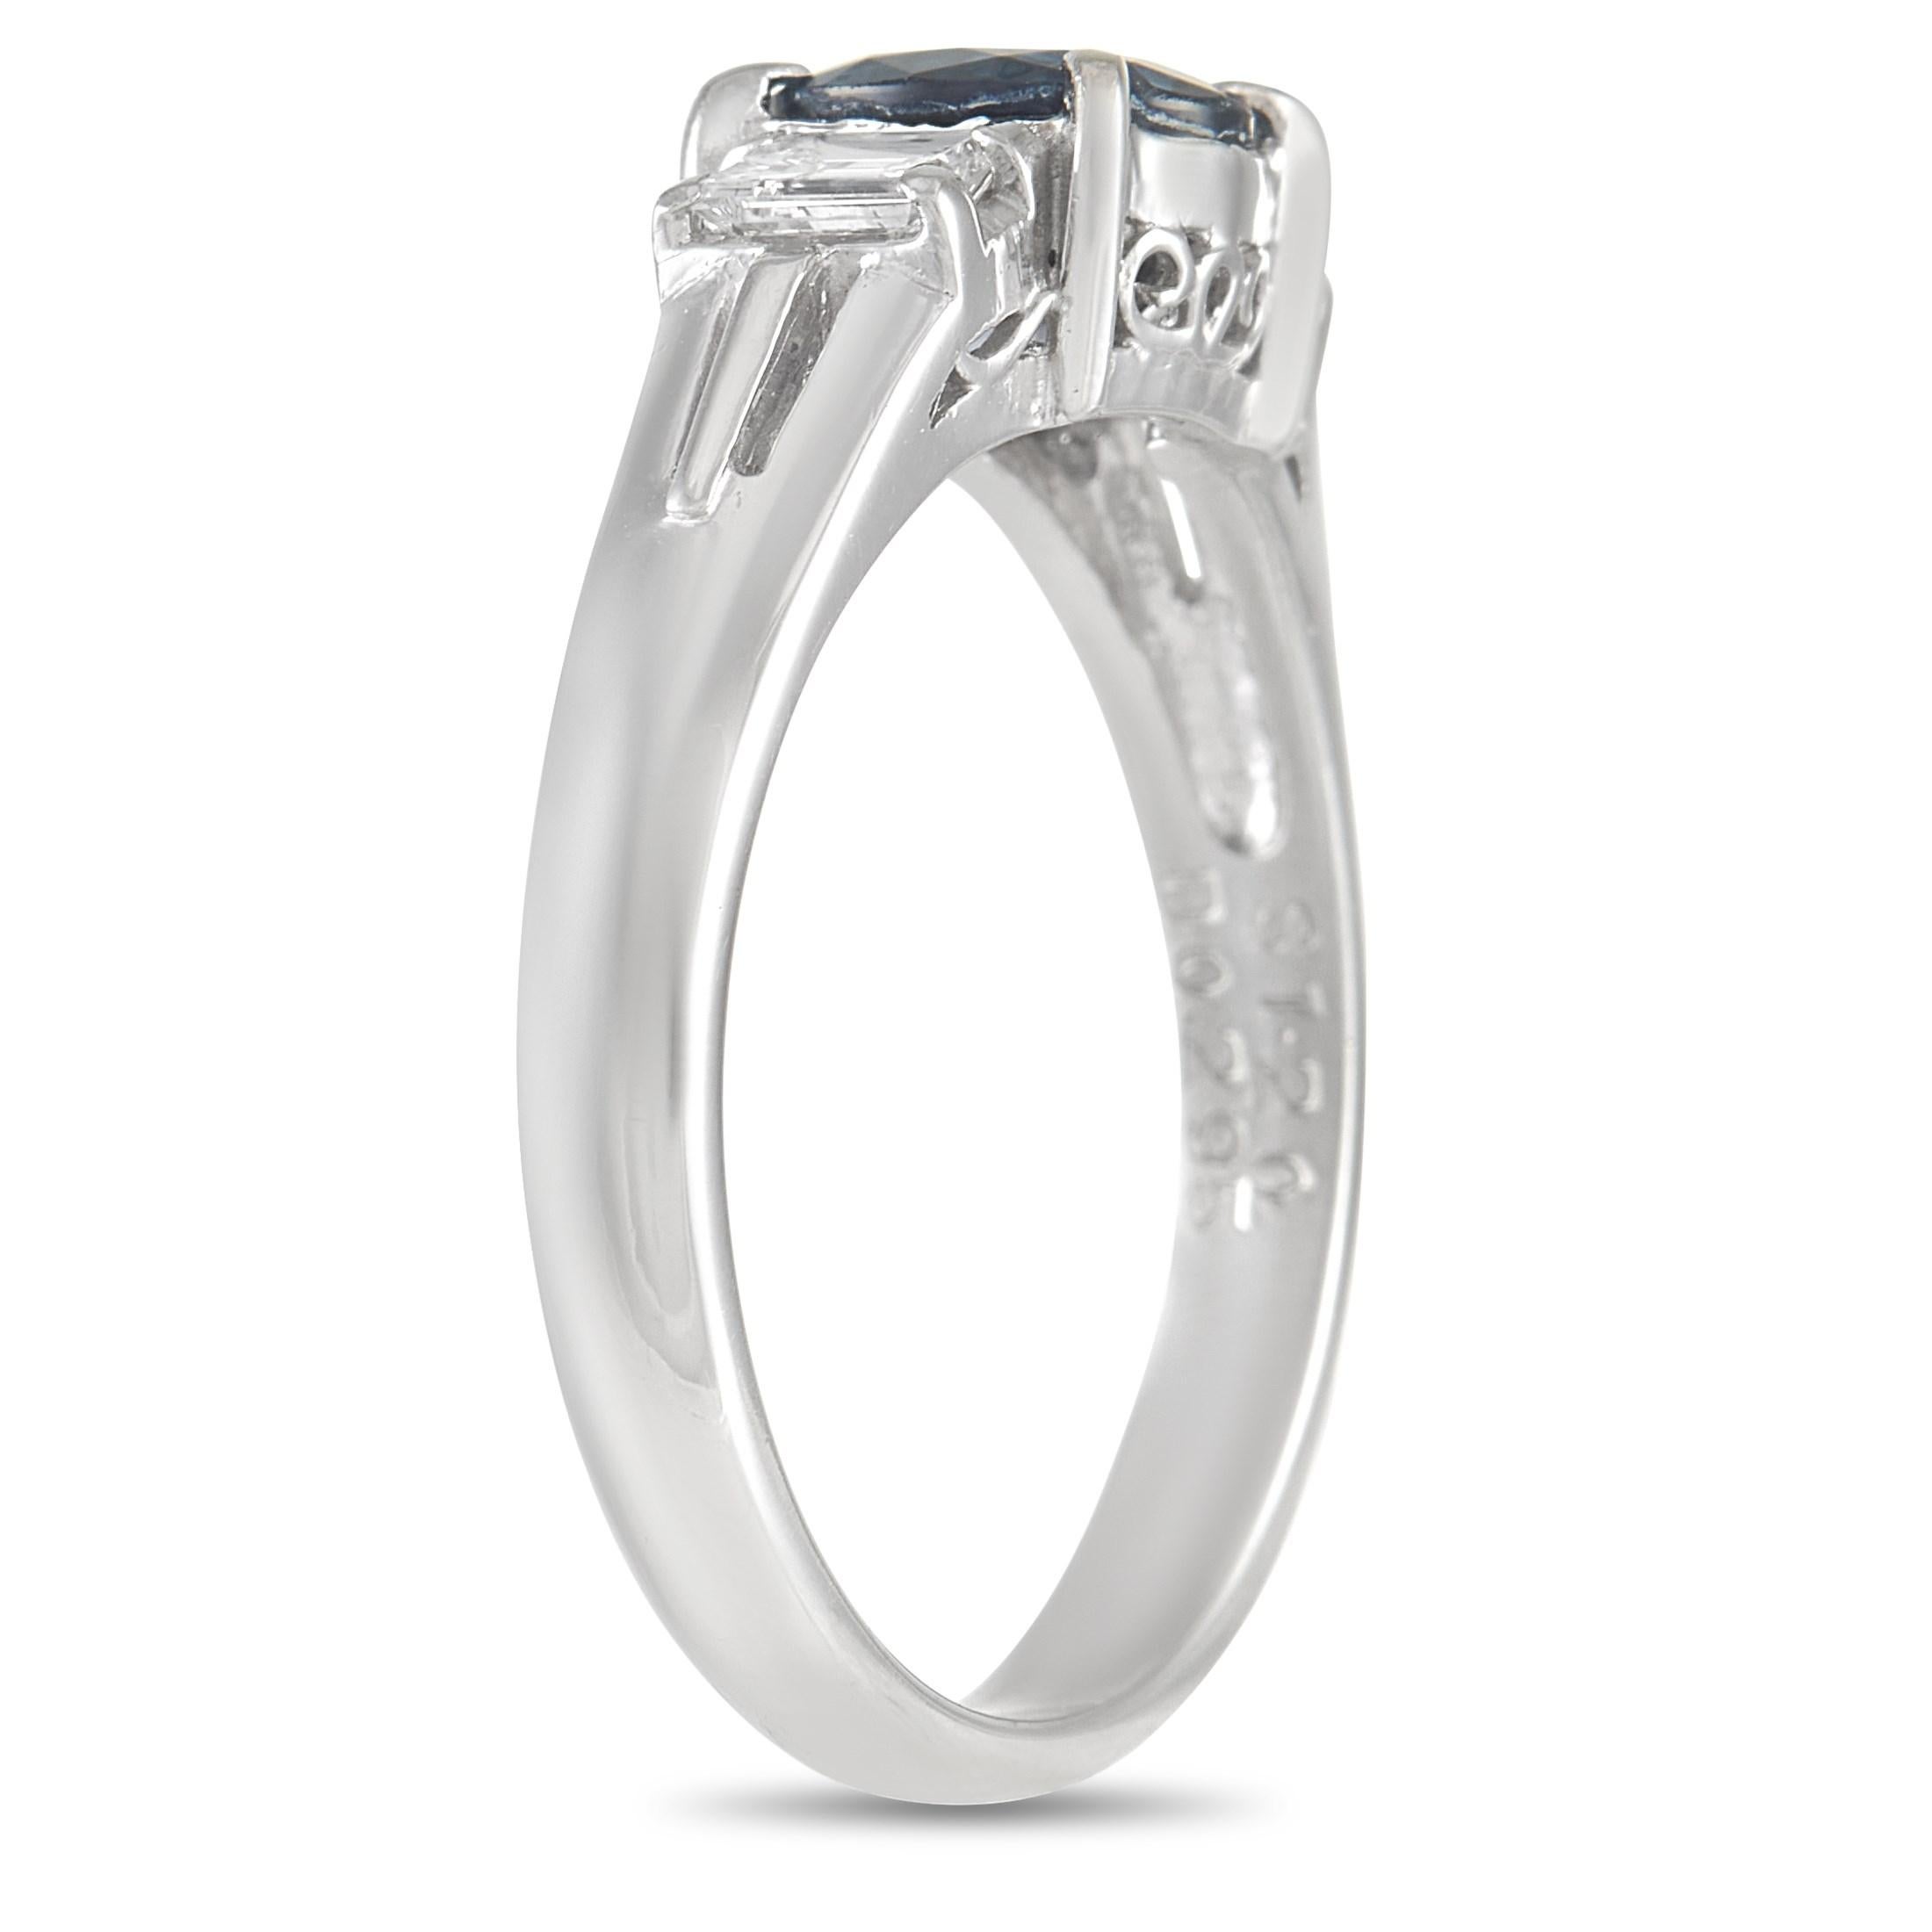 A sleek, sophisticated sense of style successfully sets this breathtaking piece apart. A platinum setting beautifully showcases the opulent deep blue 1.20 carat sapphire center stone, which is flanked by step-cut diamonds totaling 0.29 carats. A low